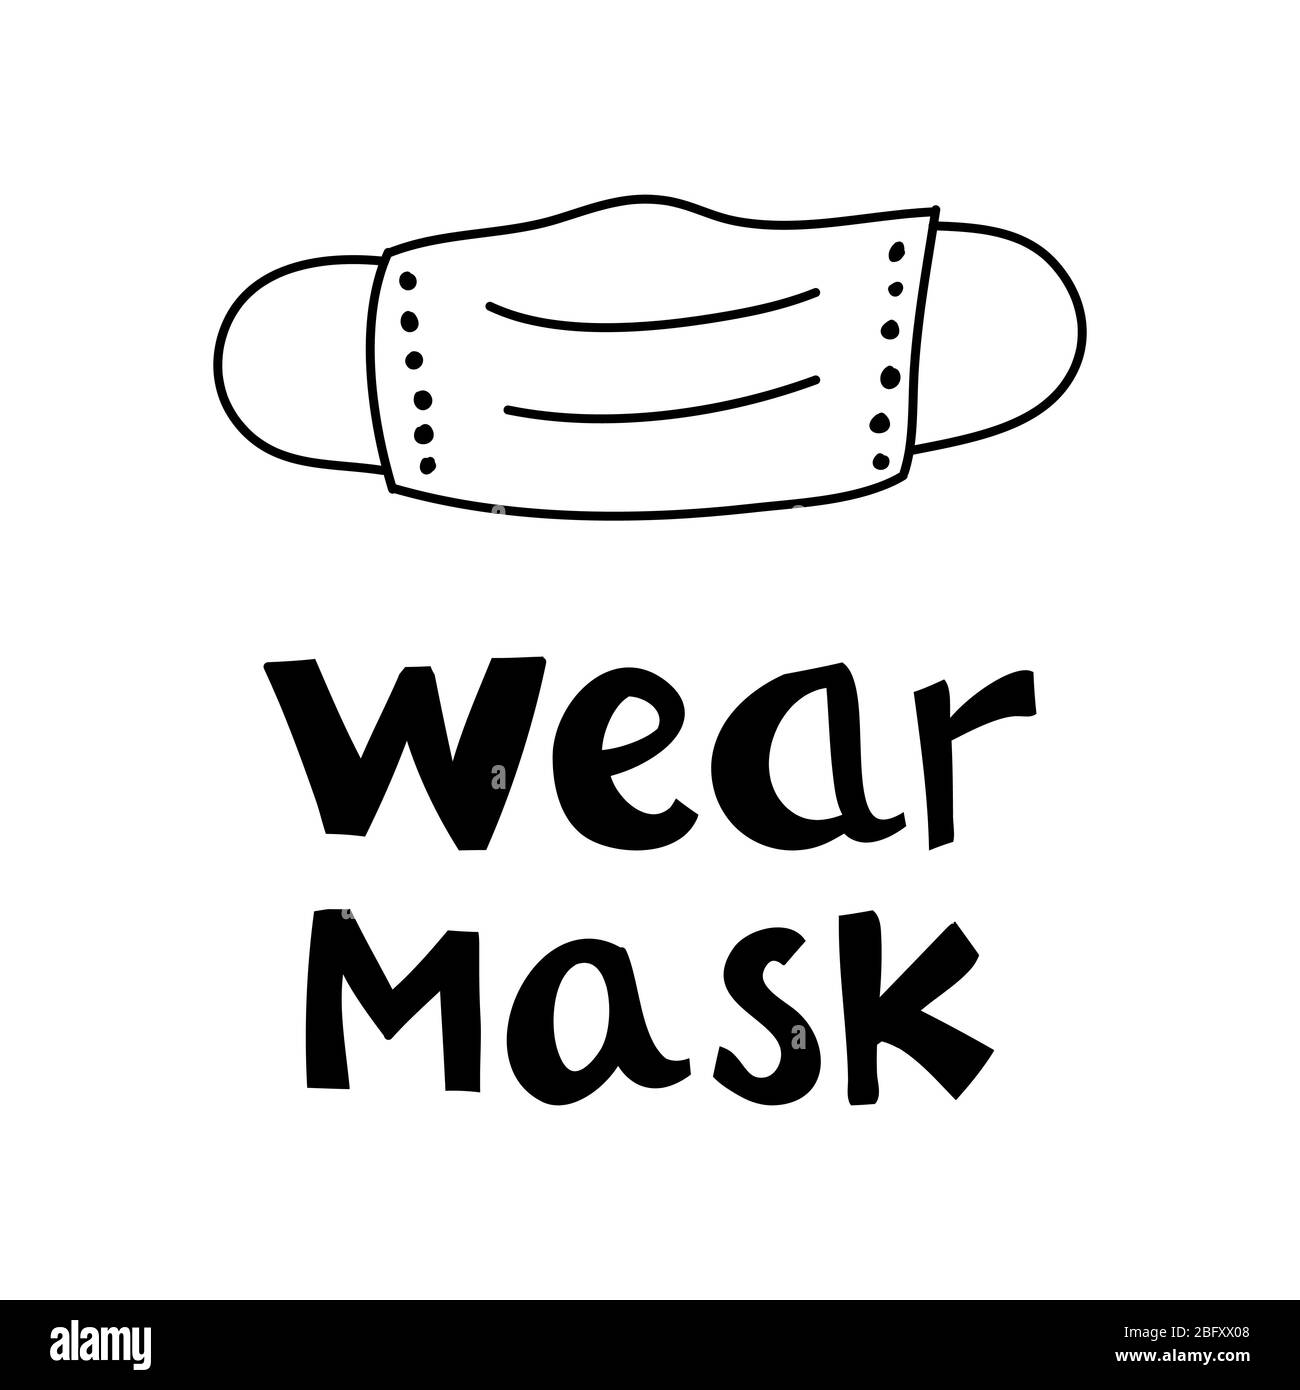 Wear mask lettering with doodle element. Motivational quote. Cute hand drawn calligraphy. Isolated on white background. Vector stock illustration. Stock Vector